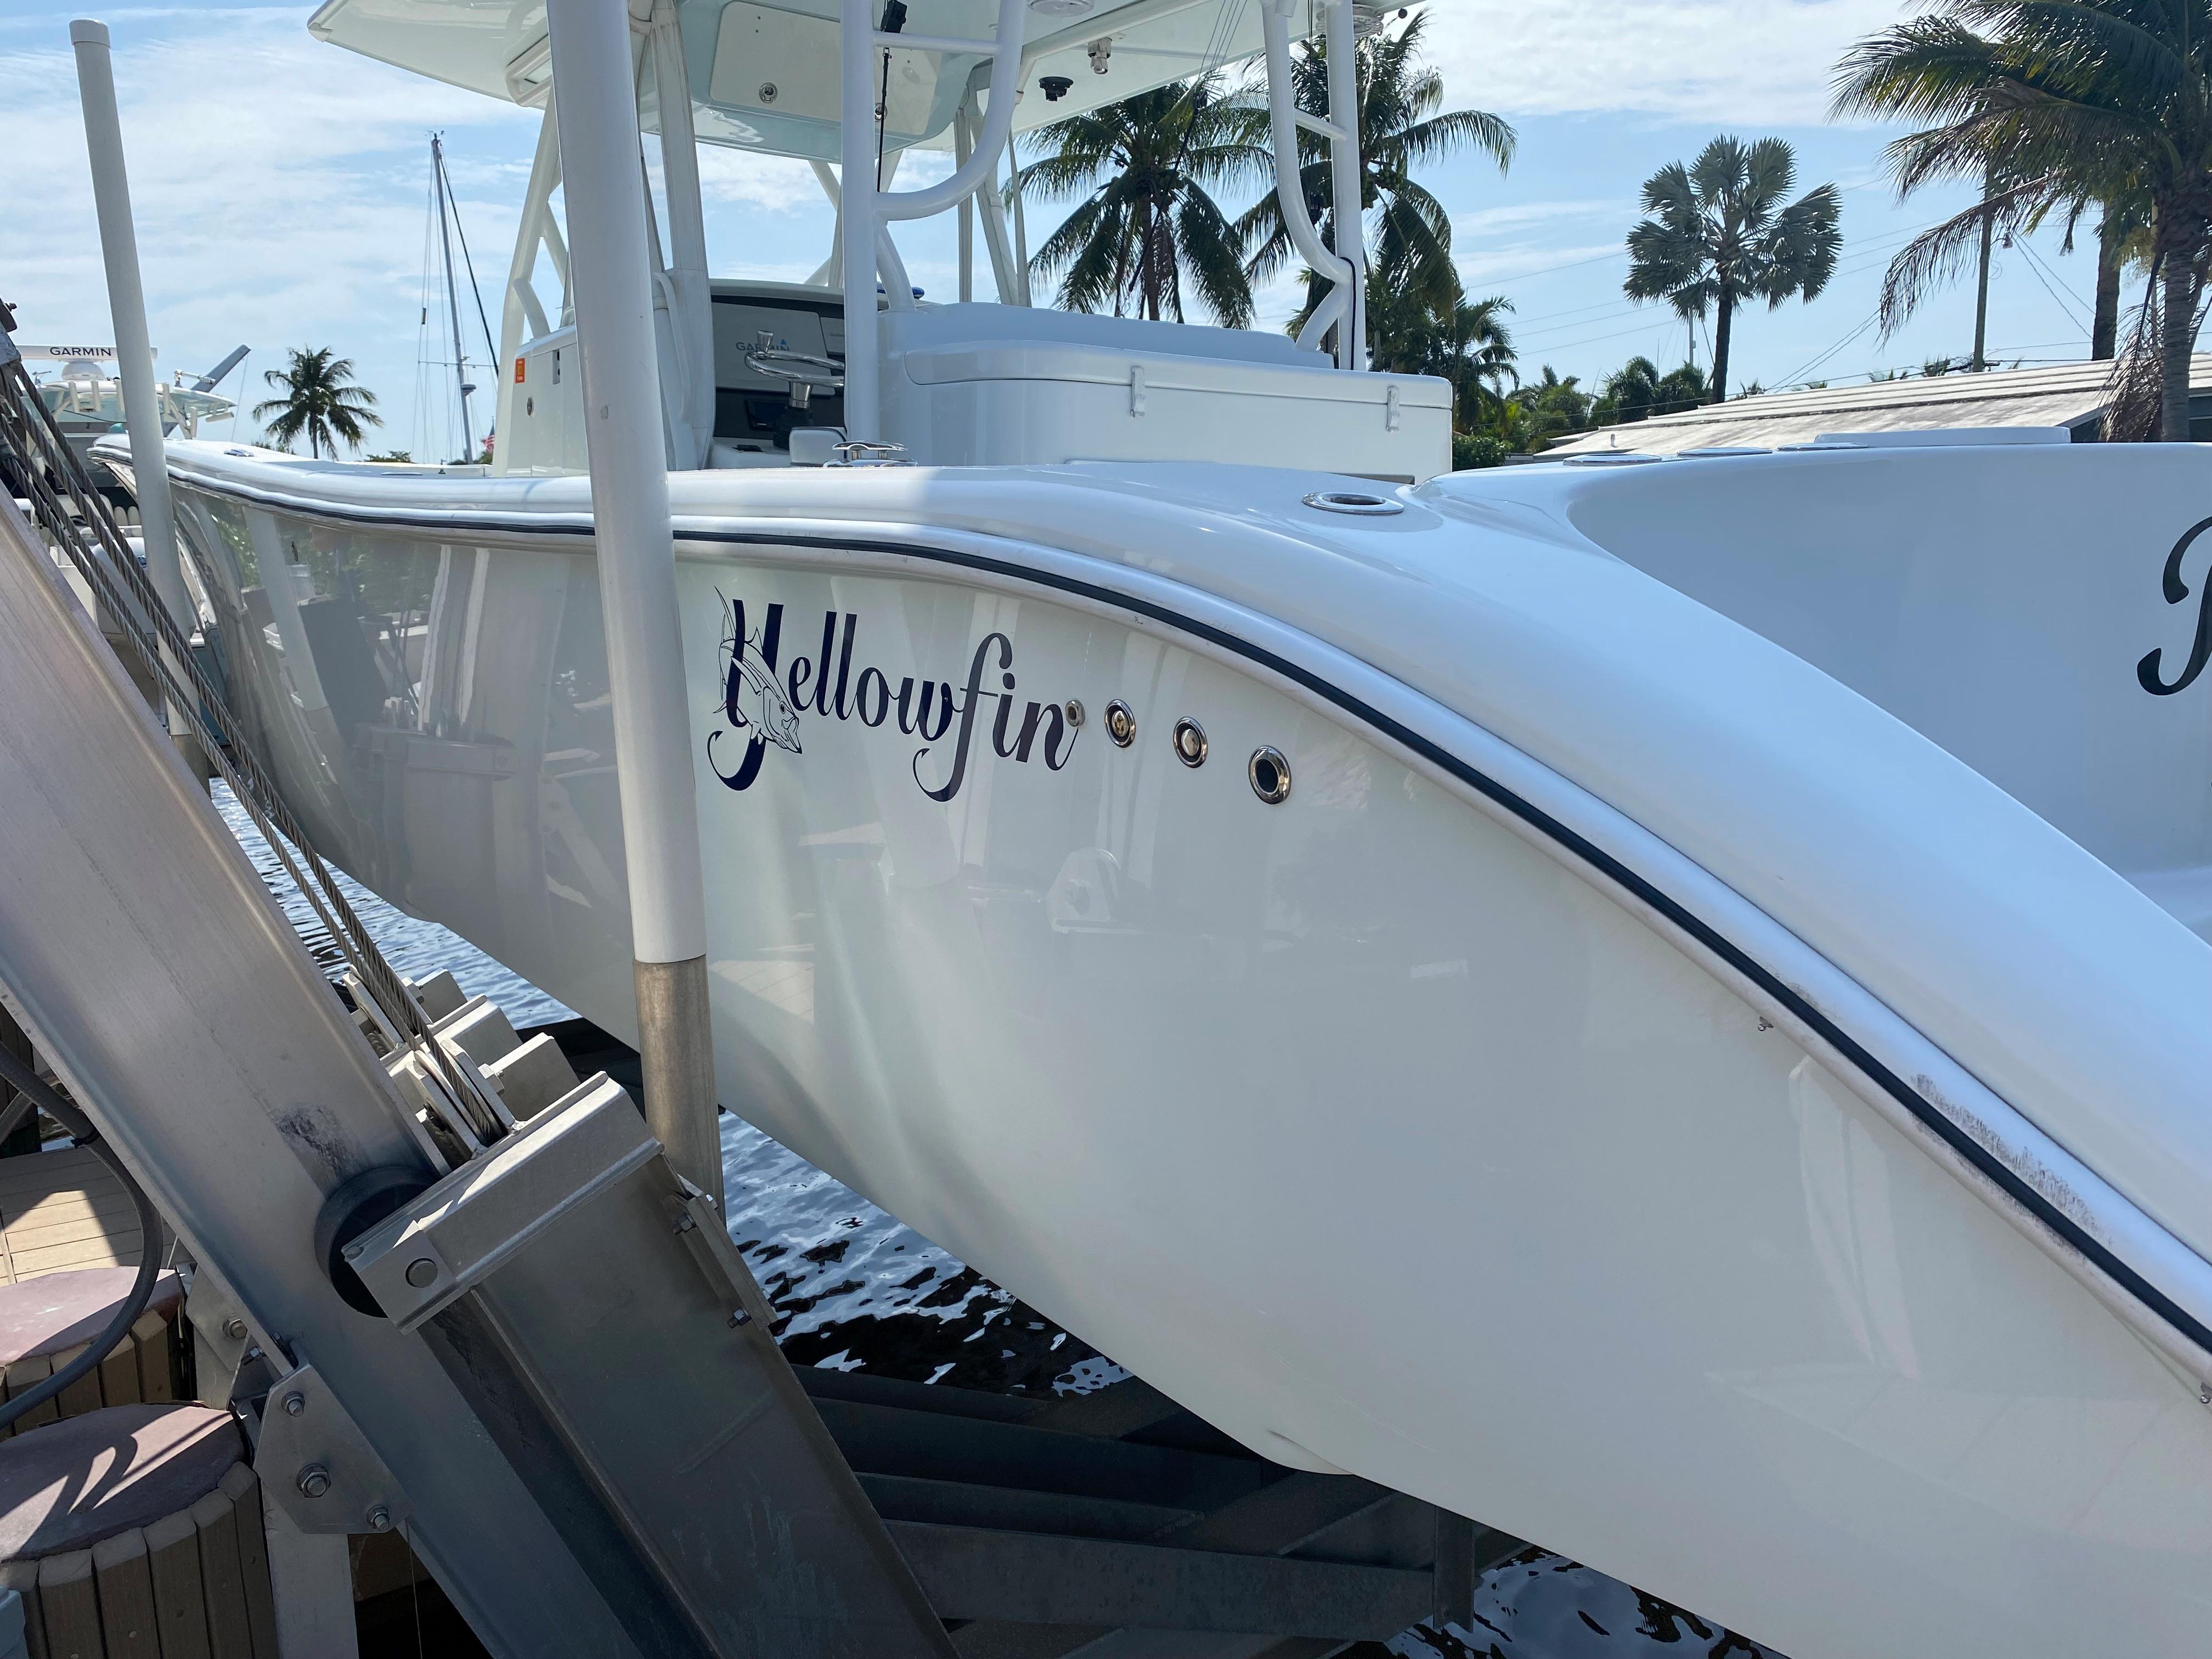 39 Yellowfin 2012 Reel Nole Fort Lauderdale, Florida Sold on 2023-01-23 by  Denison Yacht Sales